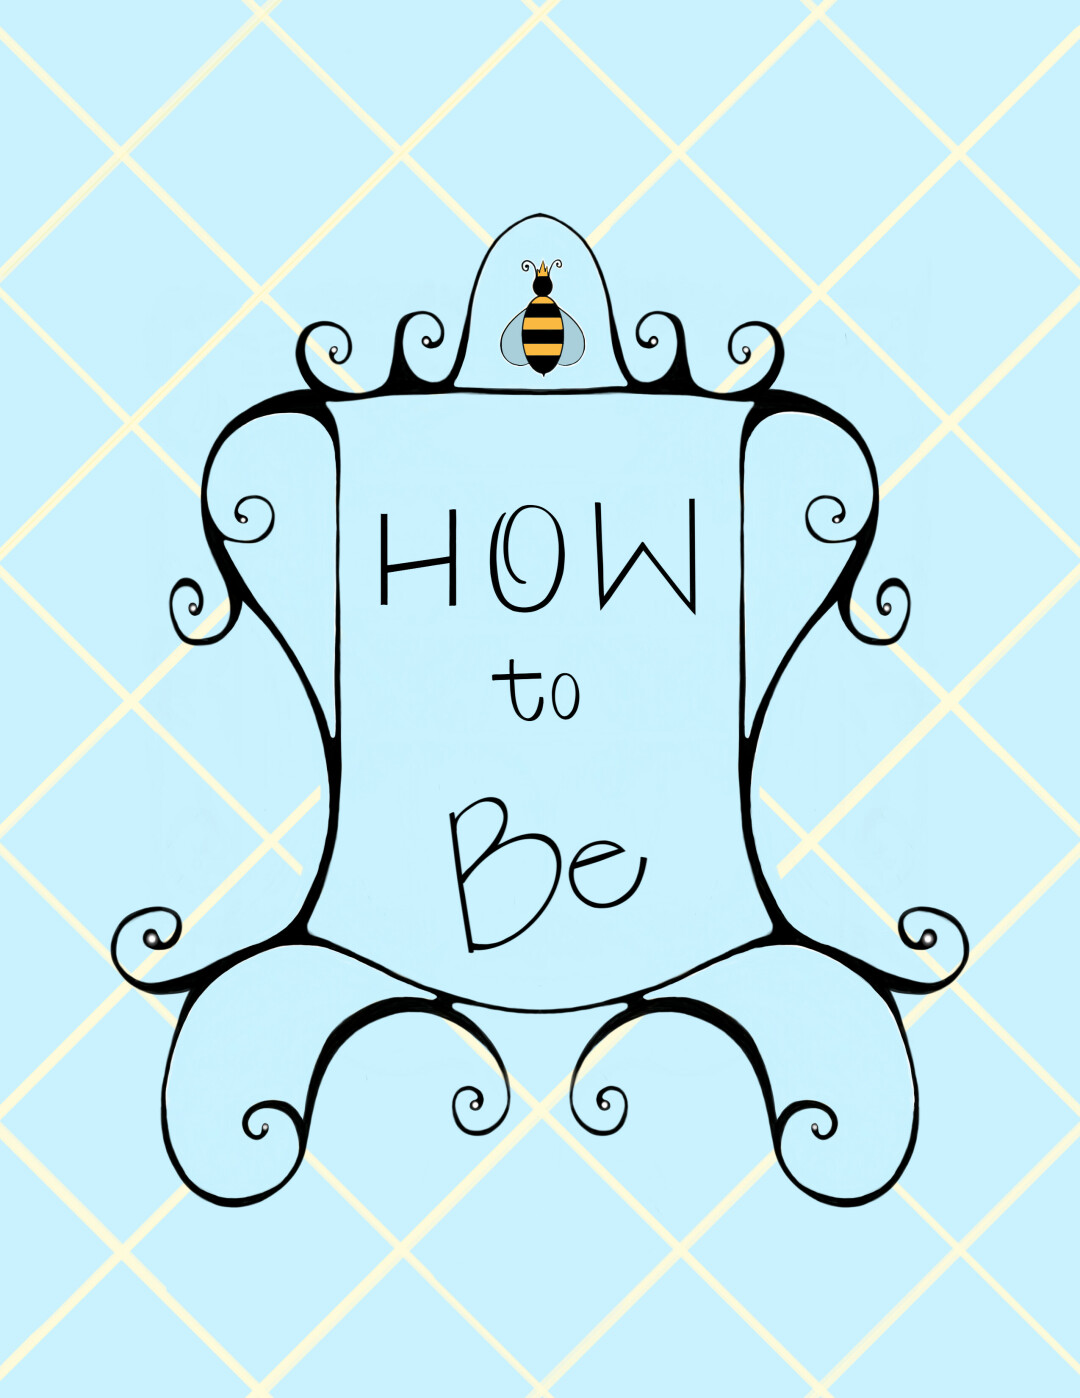 BEE IN THE MOMENT: How To Be is a workbook created by a local mother and daughter aimed to teach others to be more in the moment. (Submitted photos)